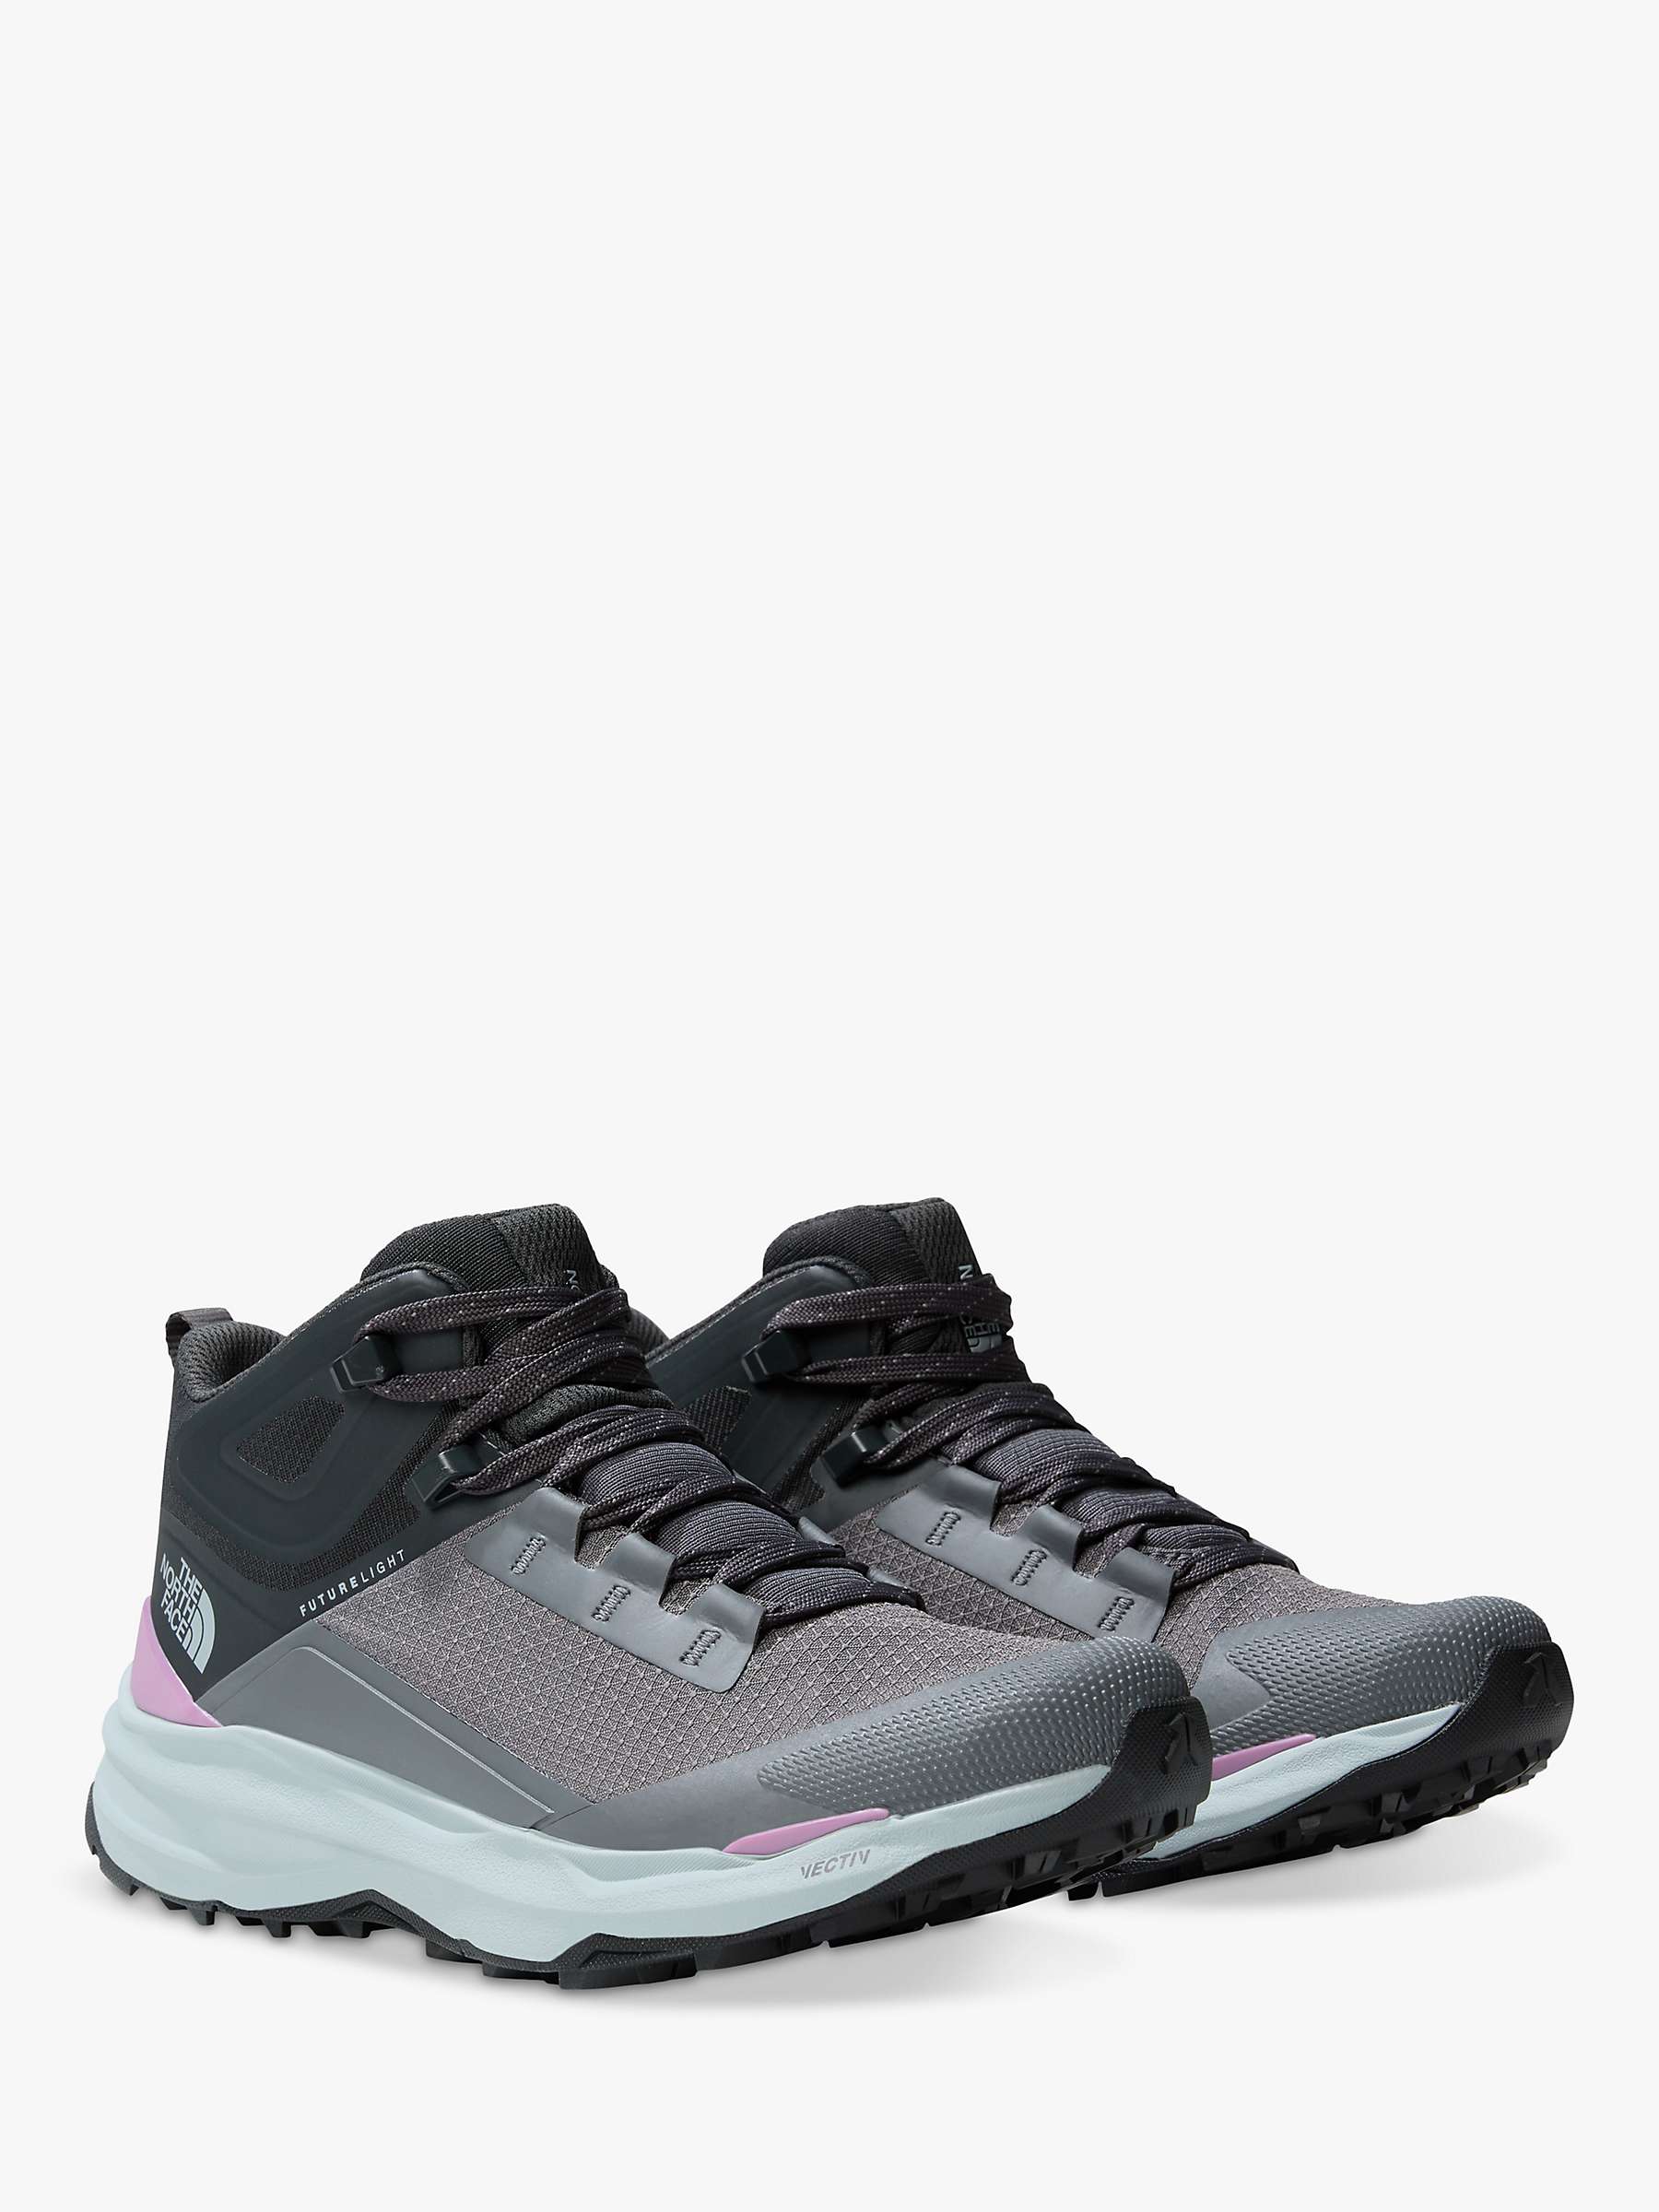 Buy The North Face Exploris II Hiking Boots, Smoked Pearl/Grey Online at johnlewis.com